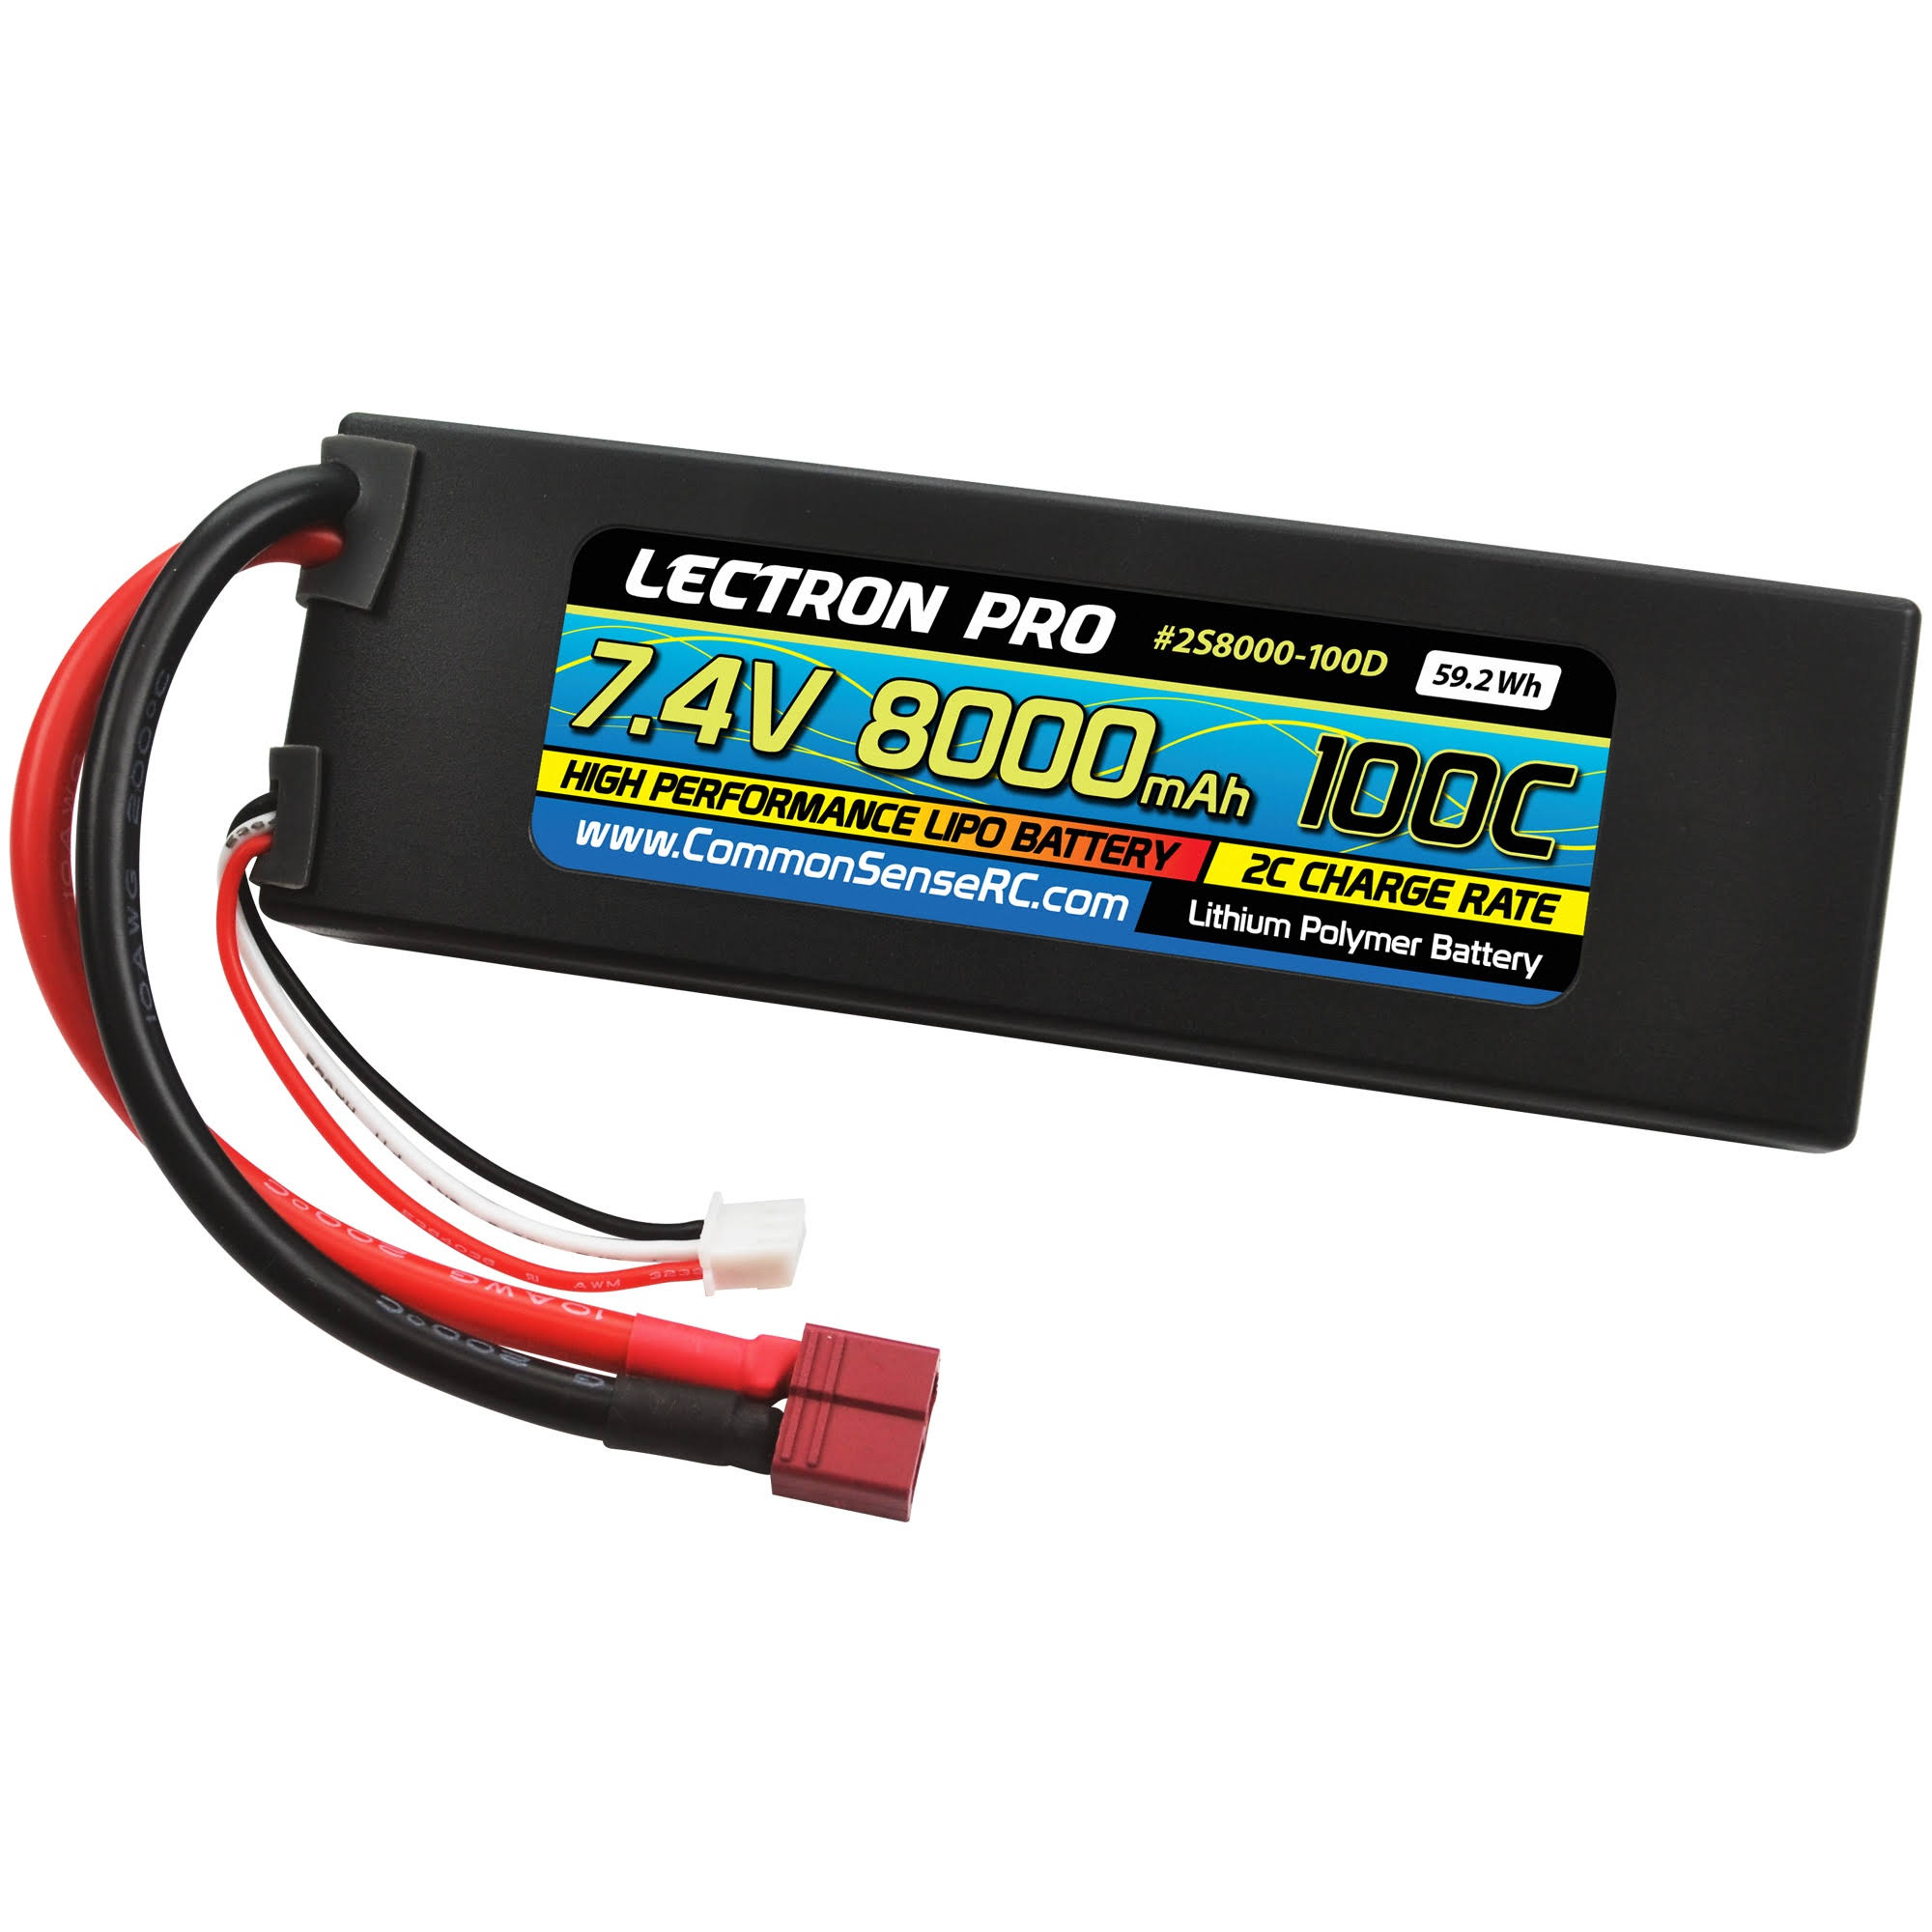 Lectron Pro 100C Lipo Battery - with Deans Type, 7.4V, 8000mah